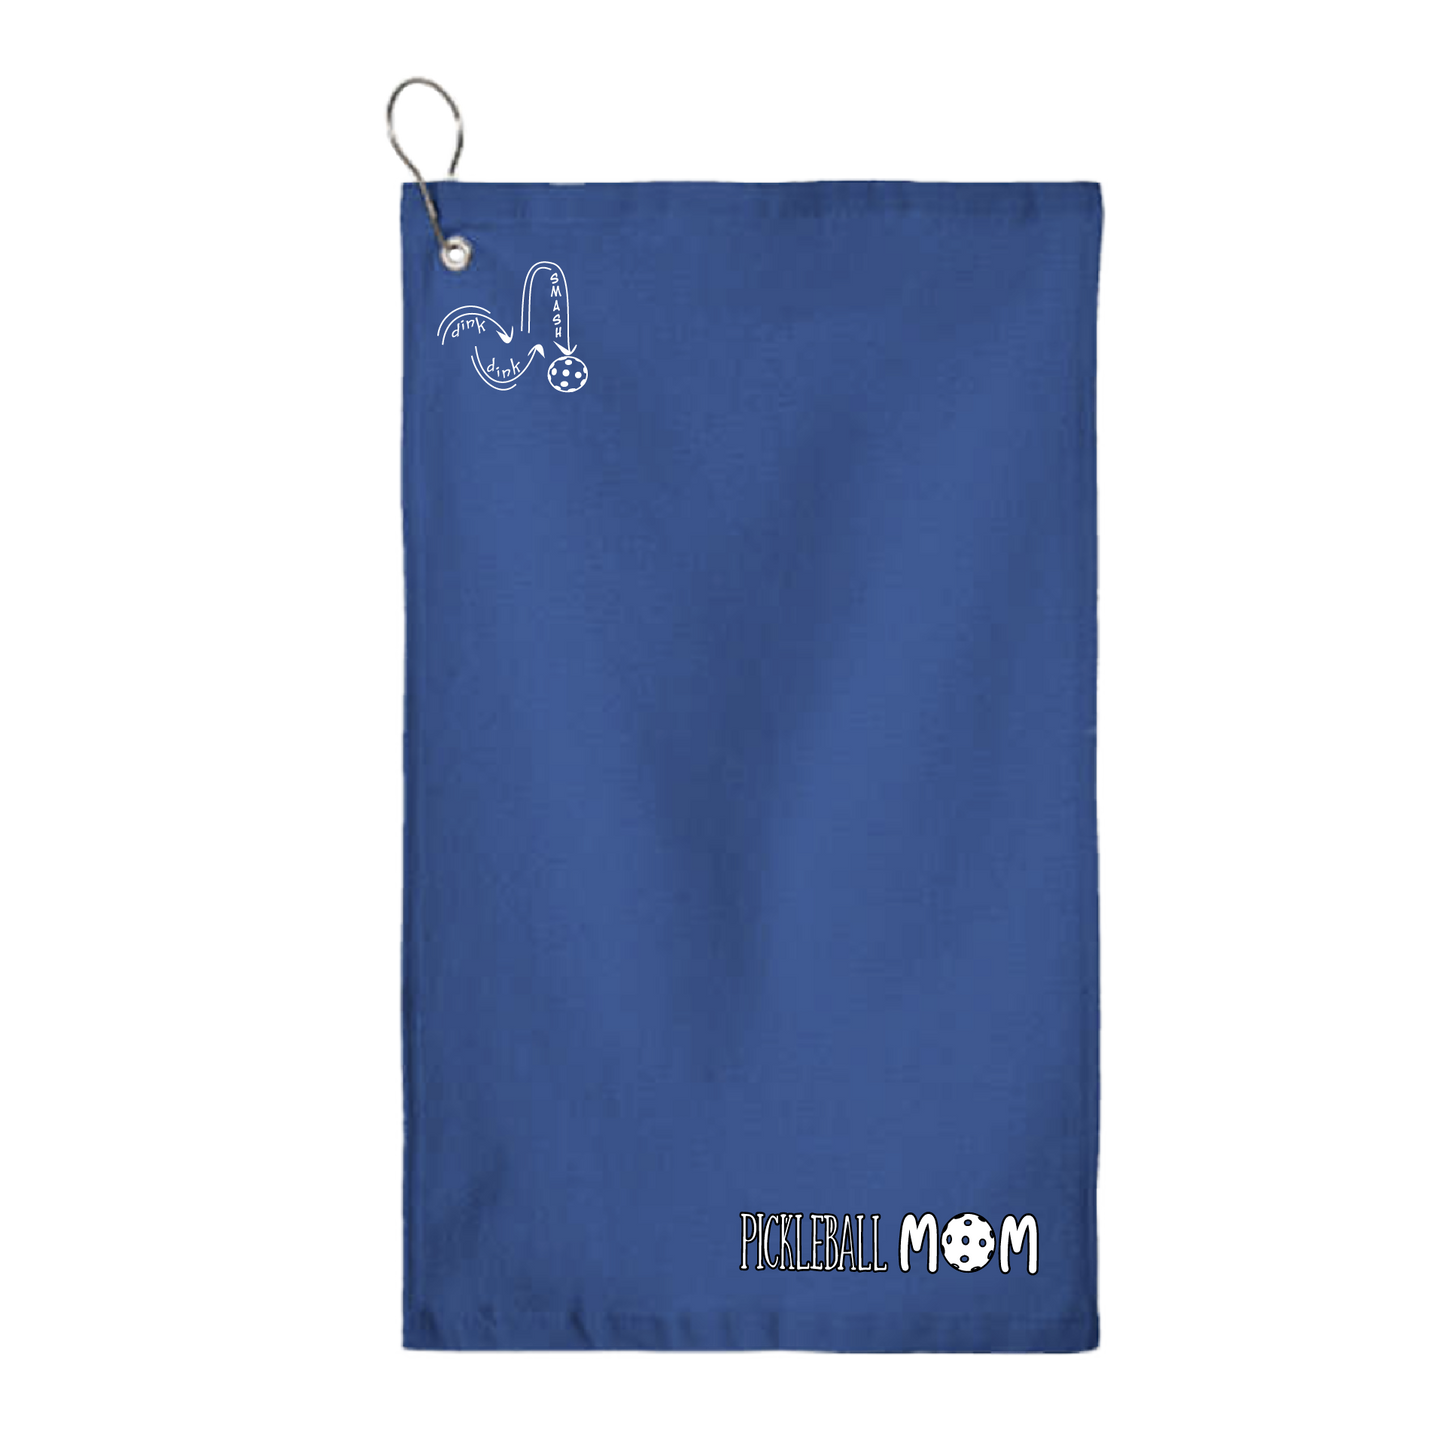 This Pickleball Mom towel is crafted with cotton terry velour for optimal performance. It features grommets, hooks, and hemmed edges for added durability. It's perfect for completing your pickleball gear, and an ideal gift for friends and tournaments. The towel is designed to be both absorbent and lightweight, so you can remain dry and comfortable while you play.